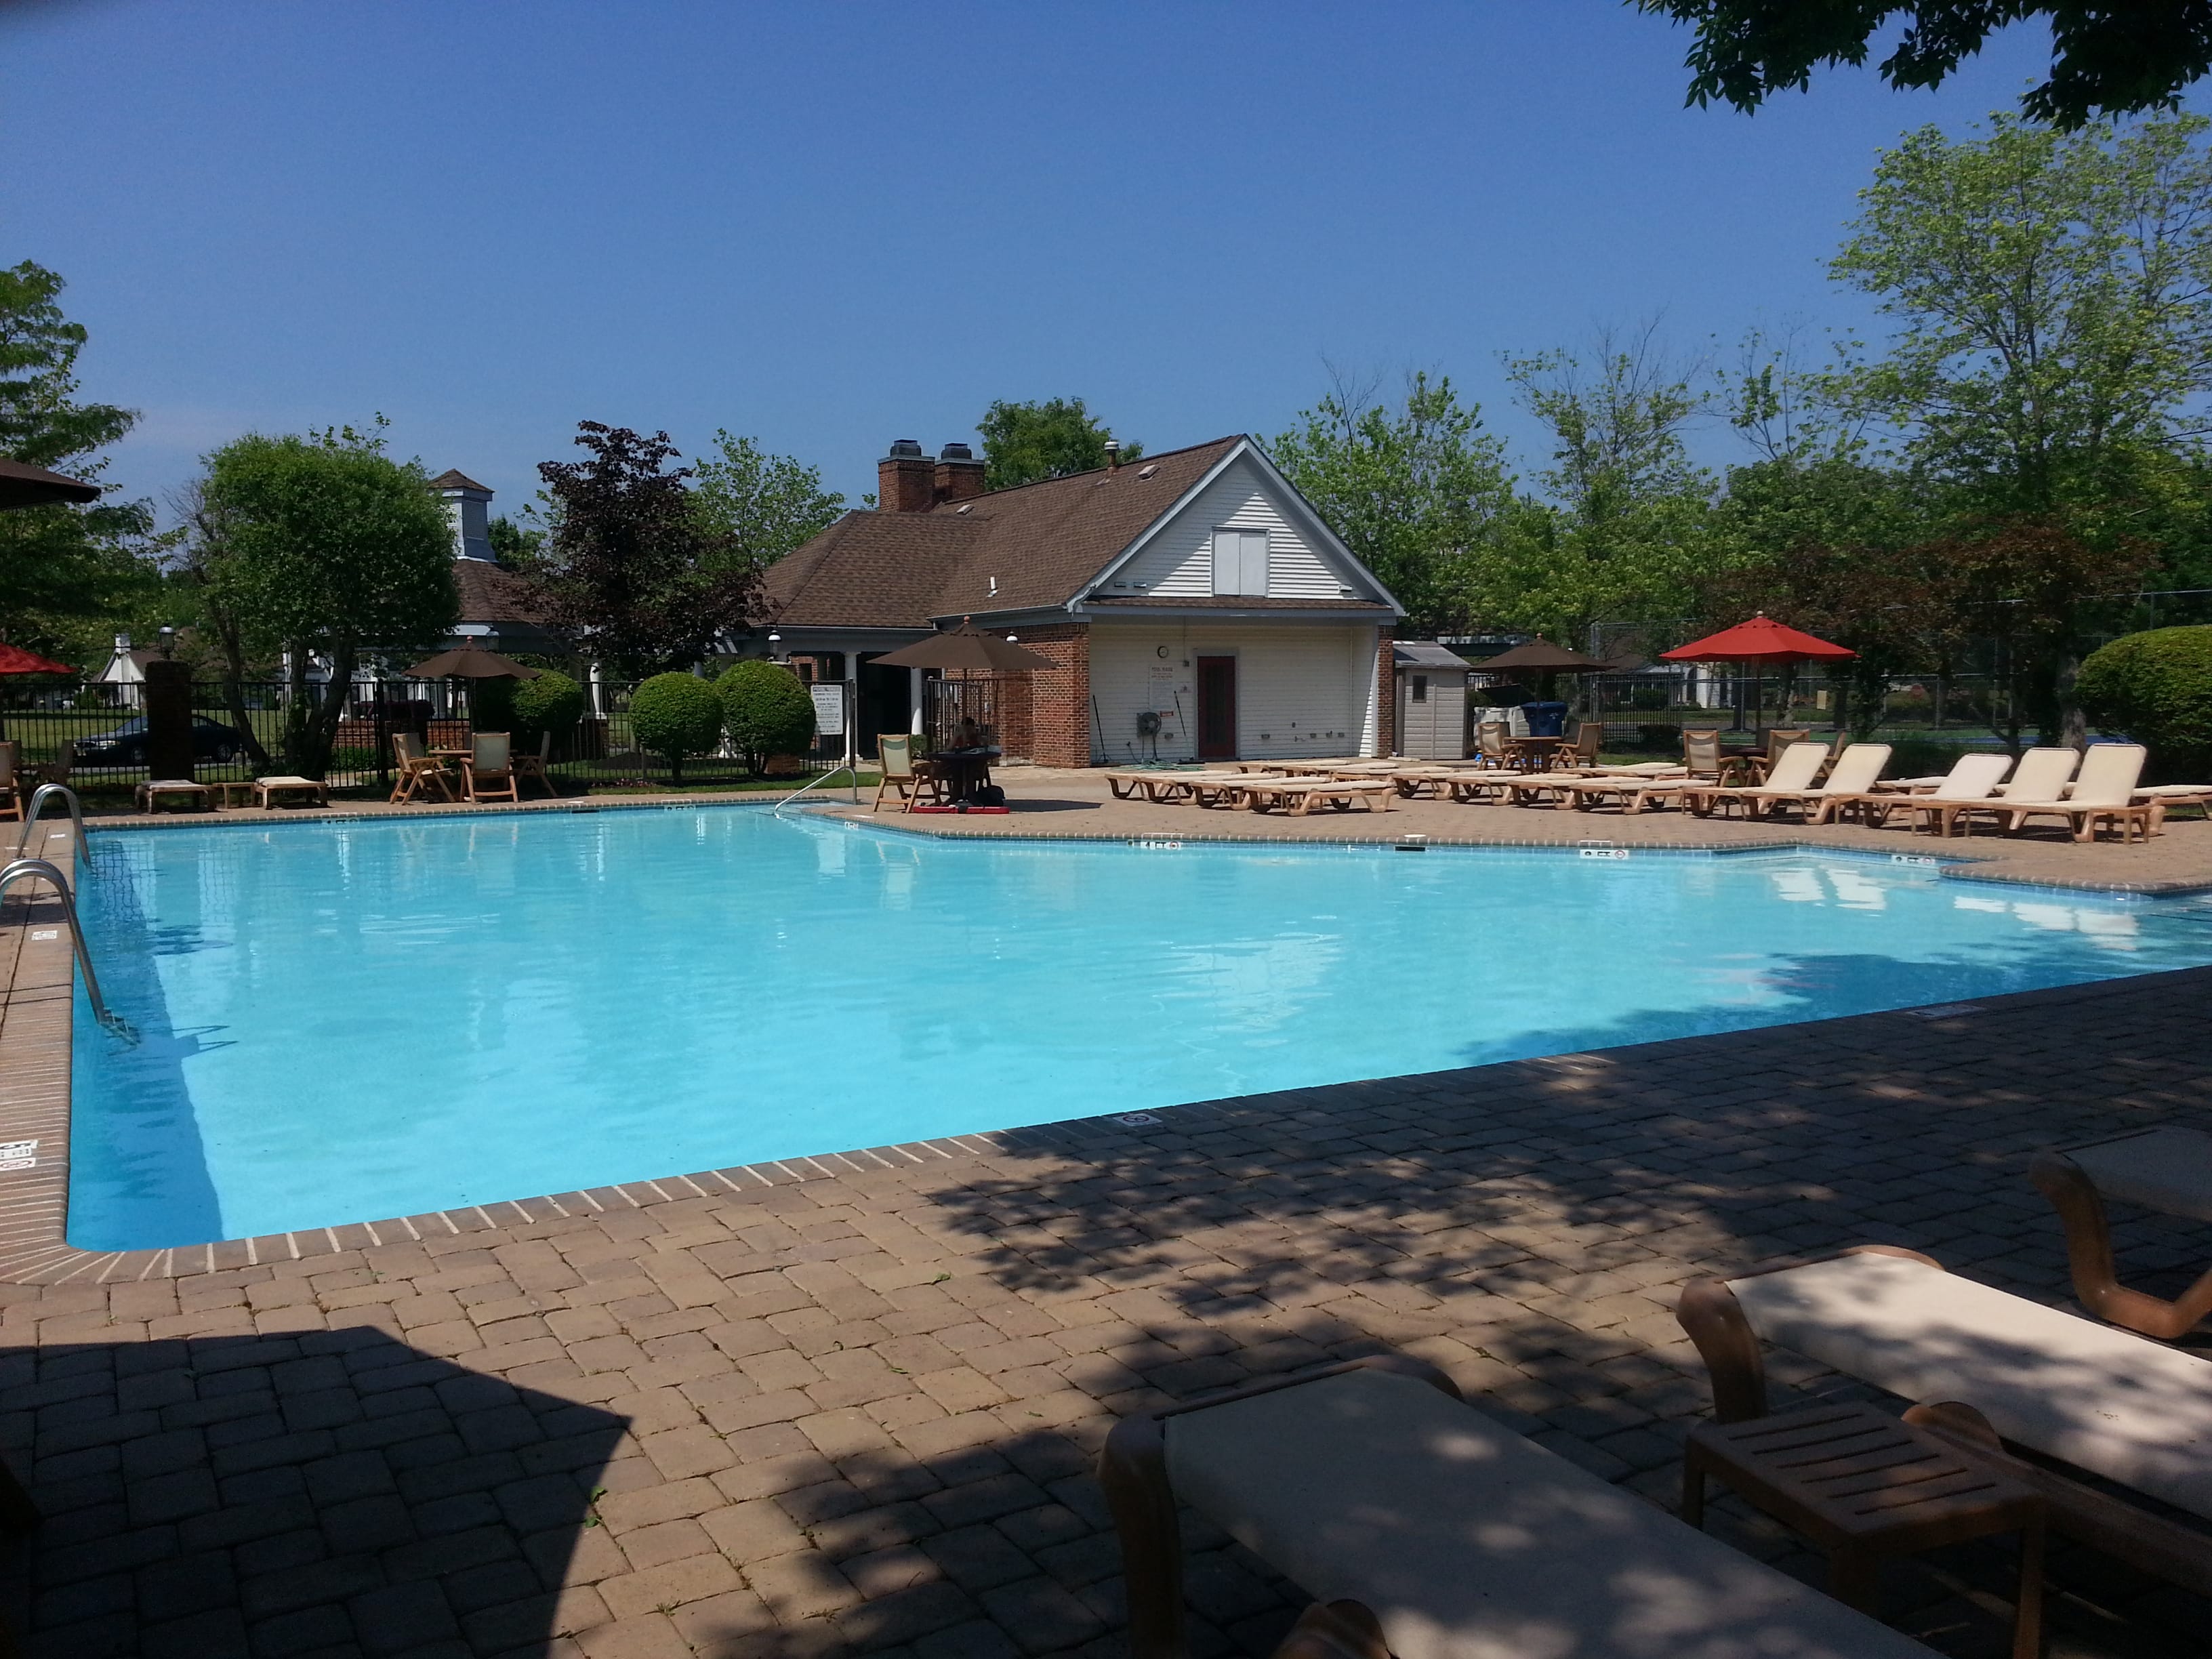 The Manor at Wayside in Ocean has a large community pool.